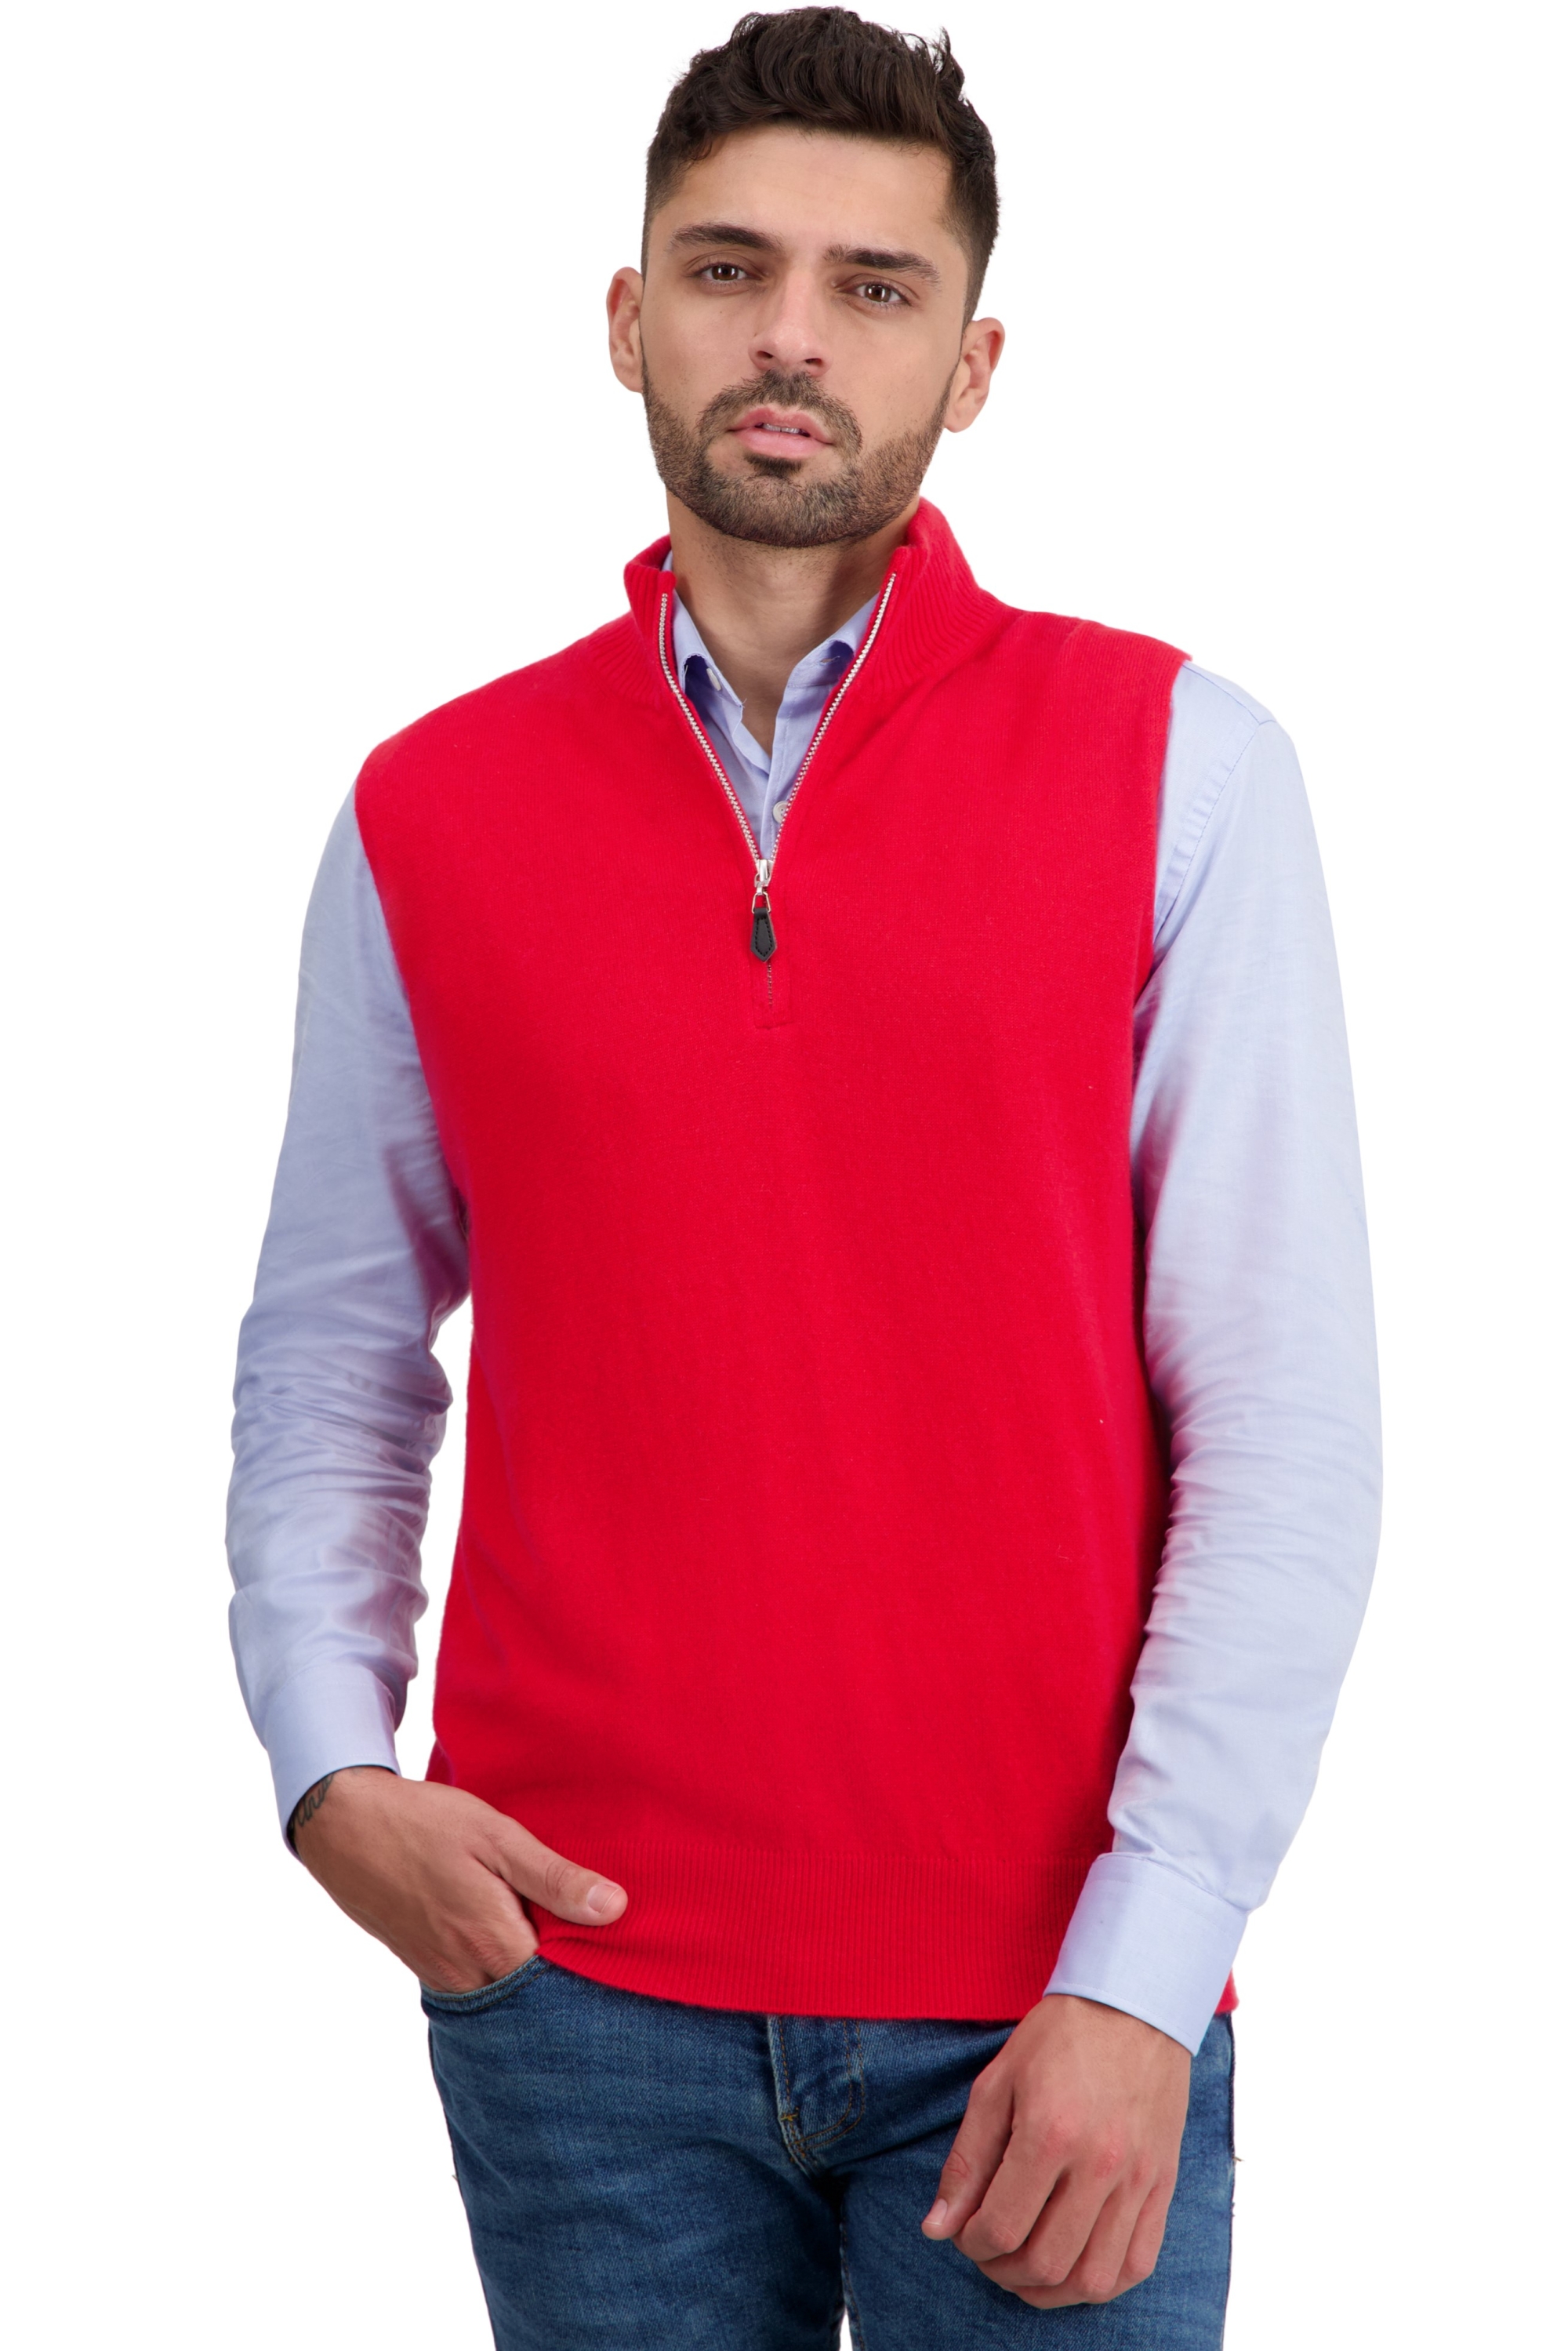 Cachemire pull homme texas rouge 2xl